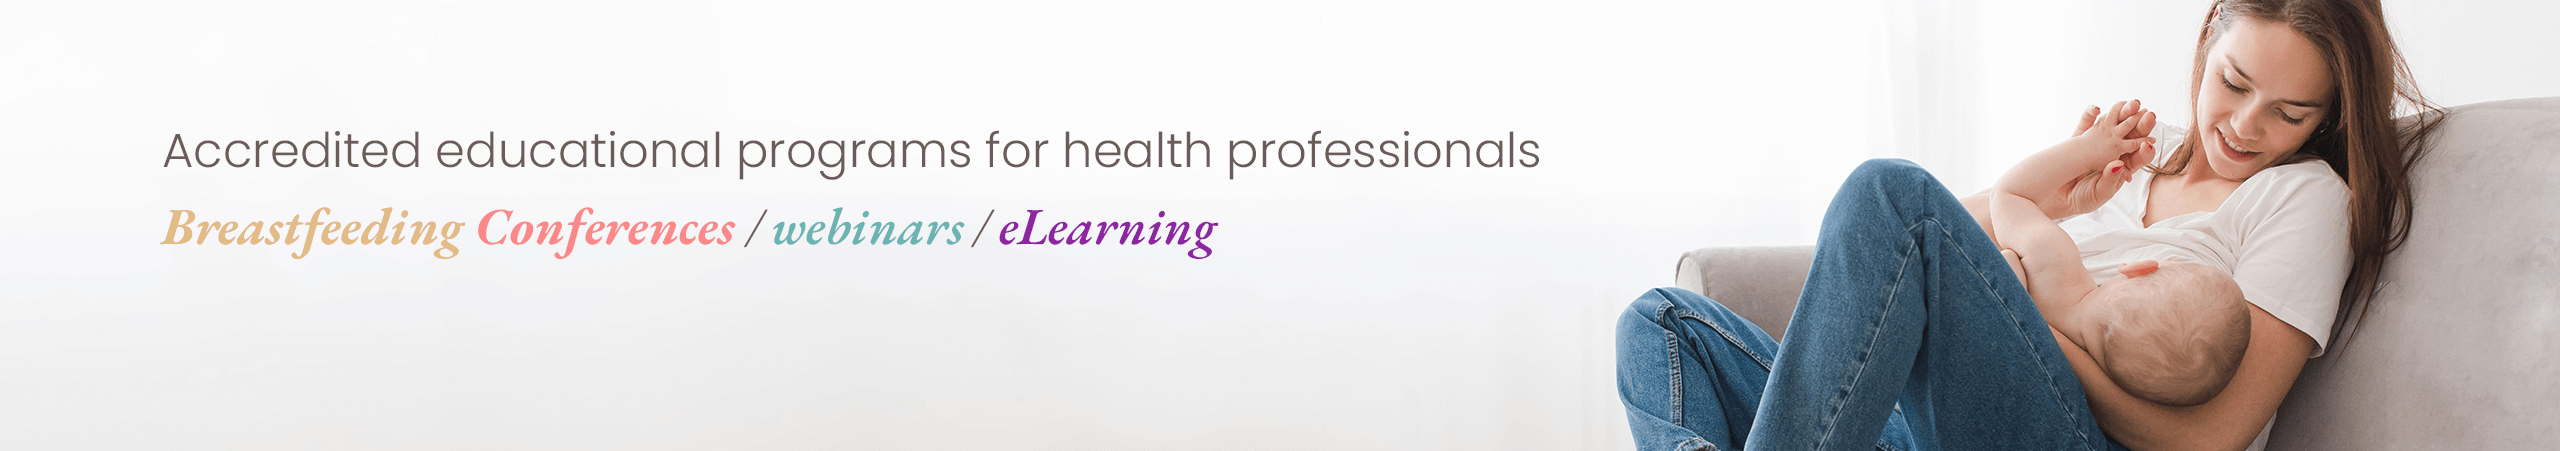 Accredited educational programs for health professionals